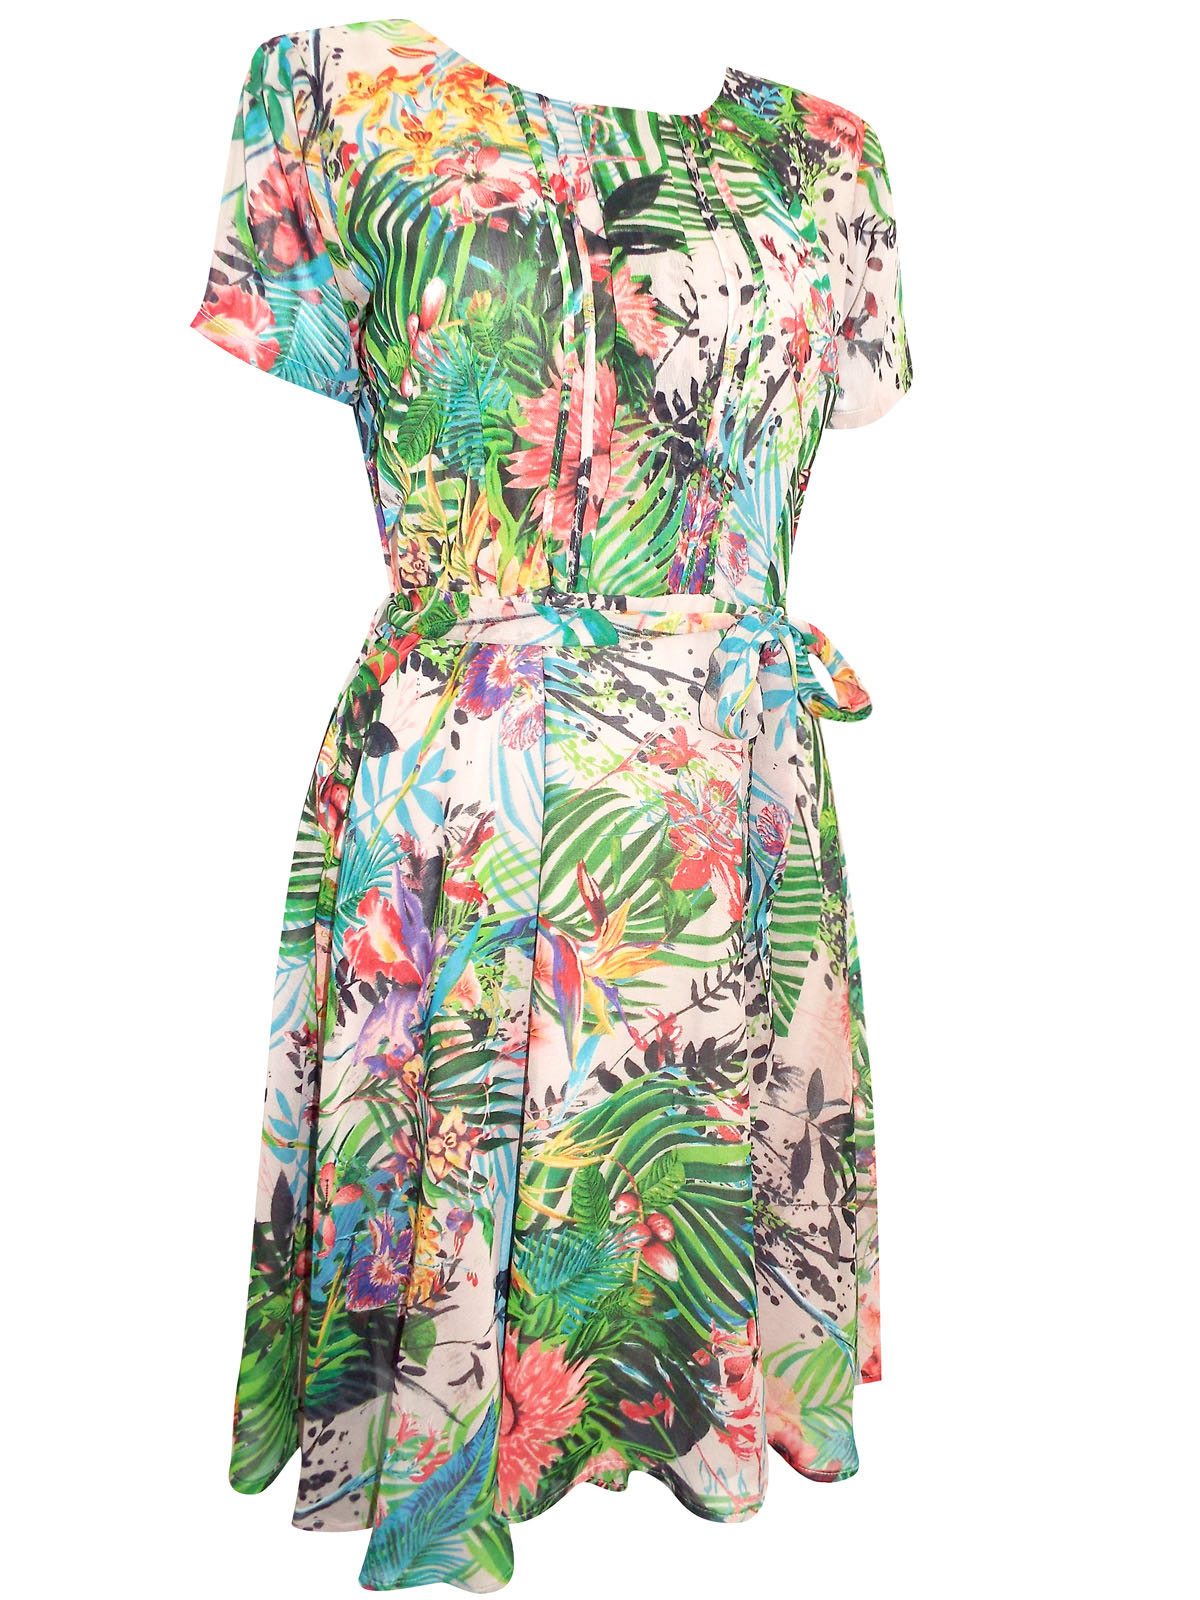 First Avenue GREEN Pleated Palm Print Belted Dress - Size 10 to 20